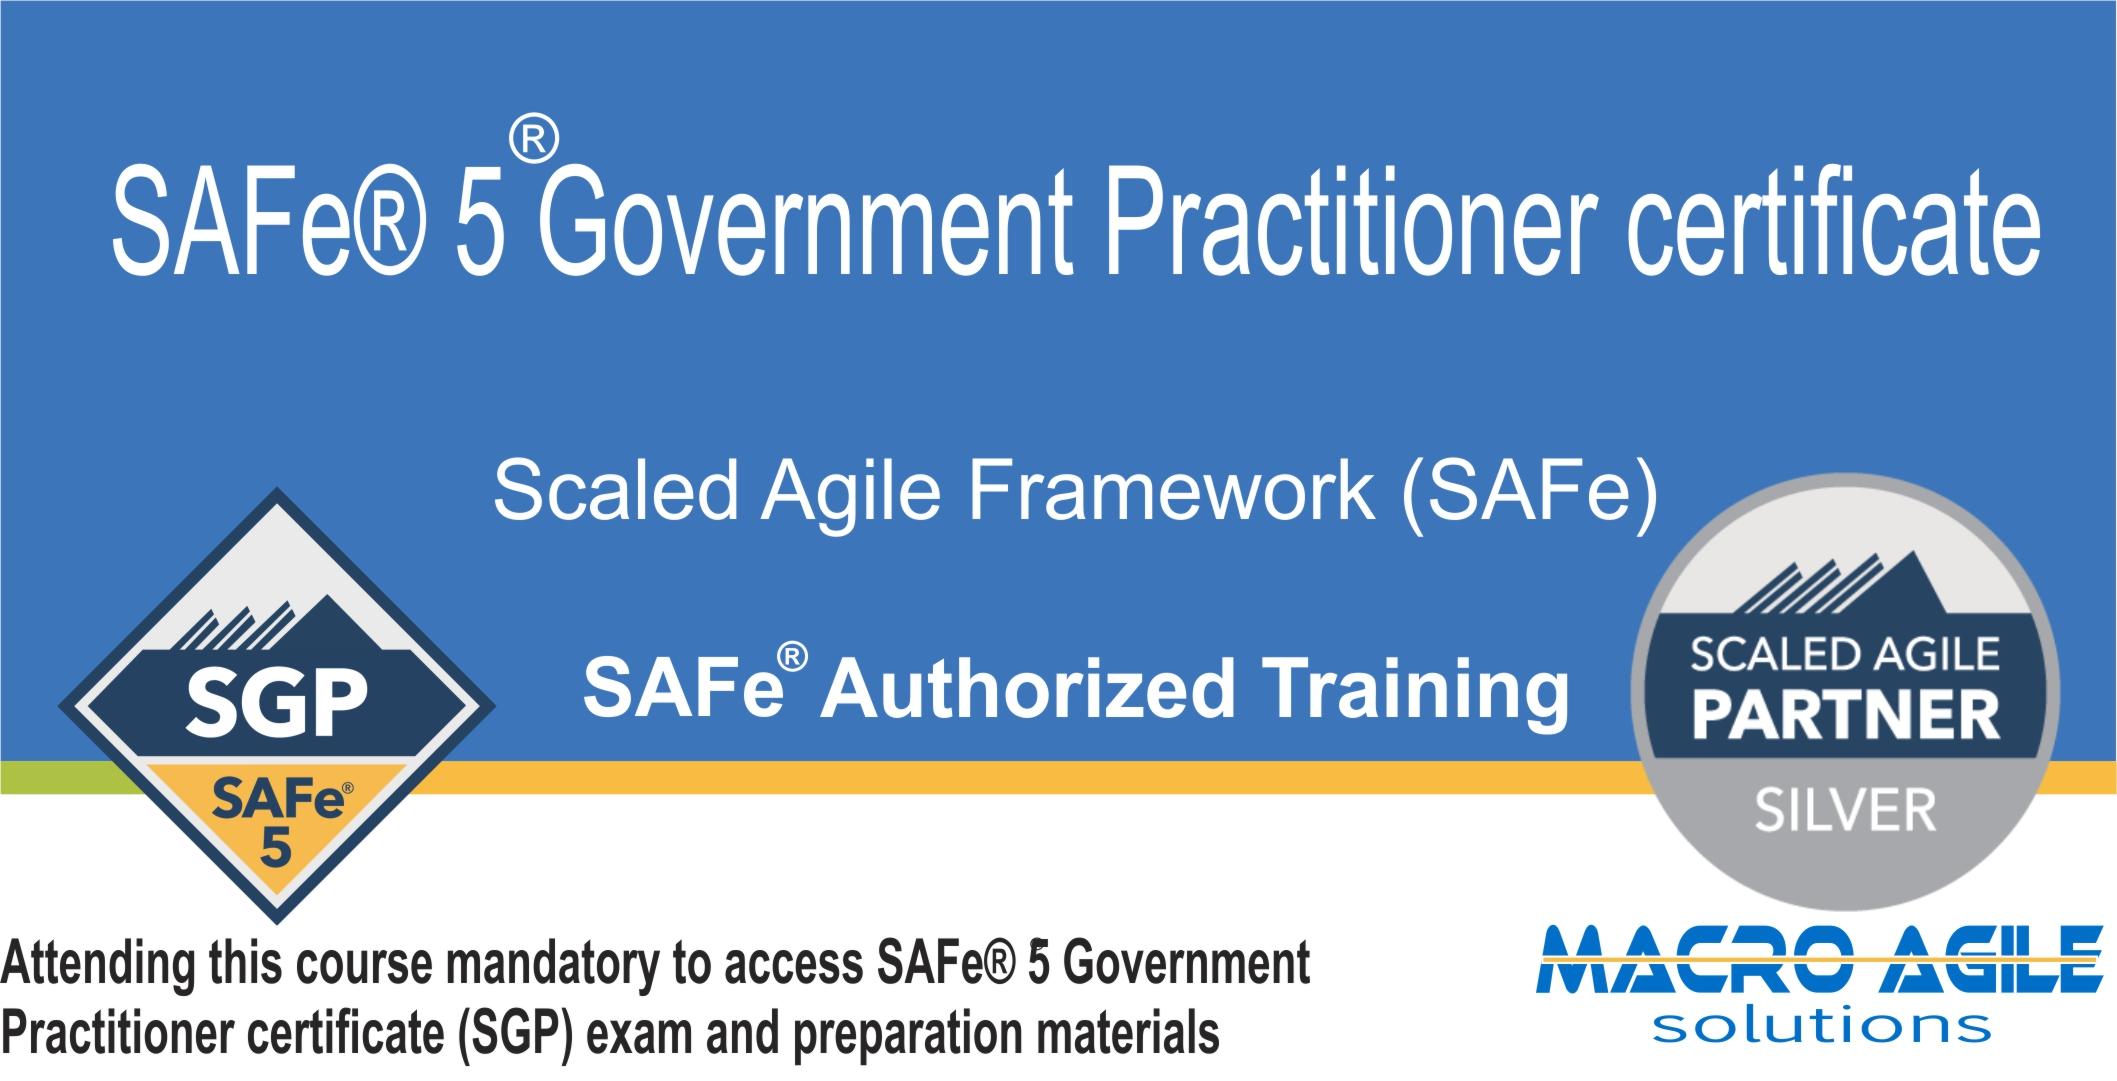 SAFe® 4 Government Practitioner Training & Certification